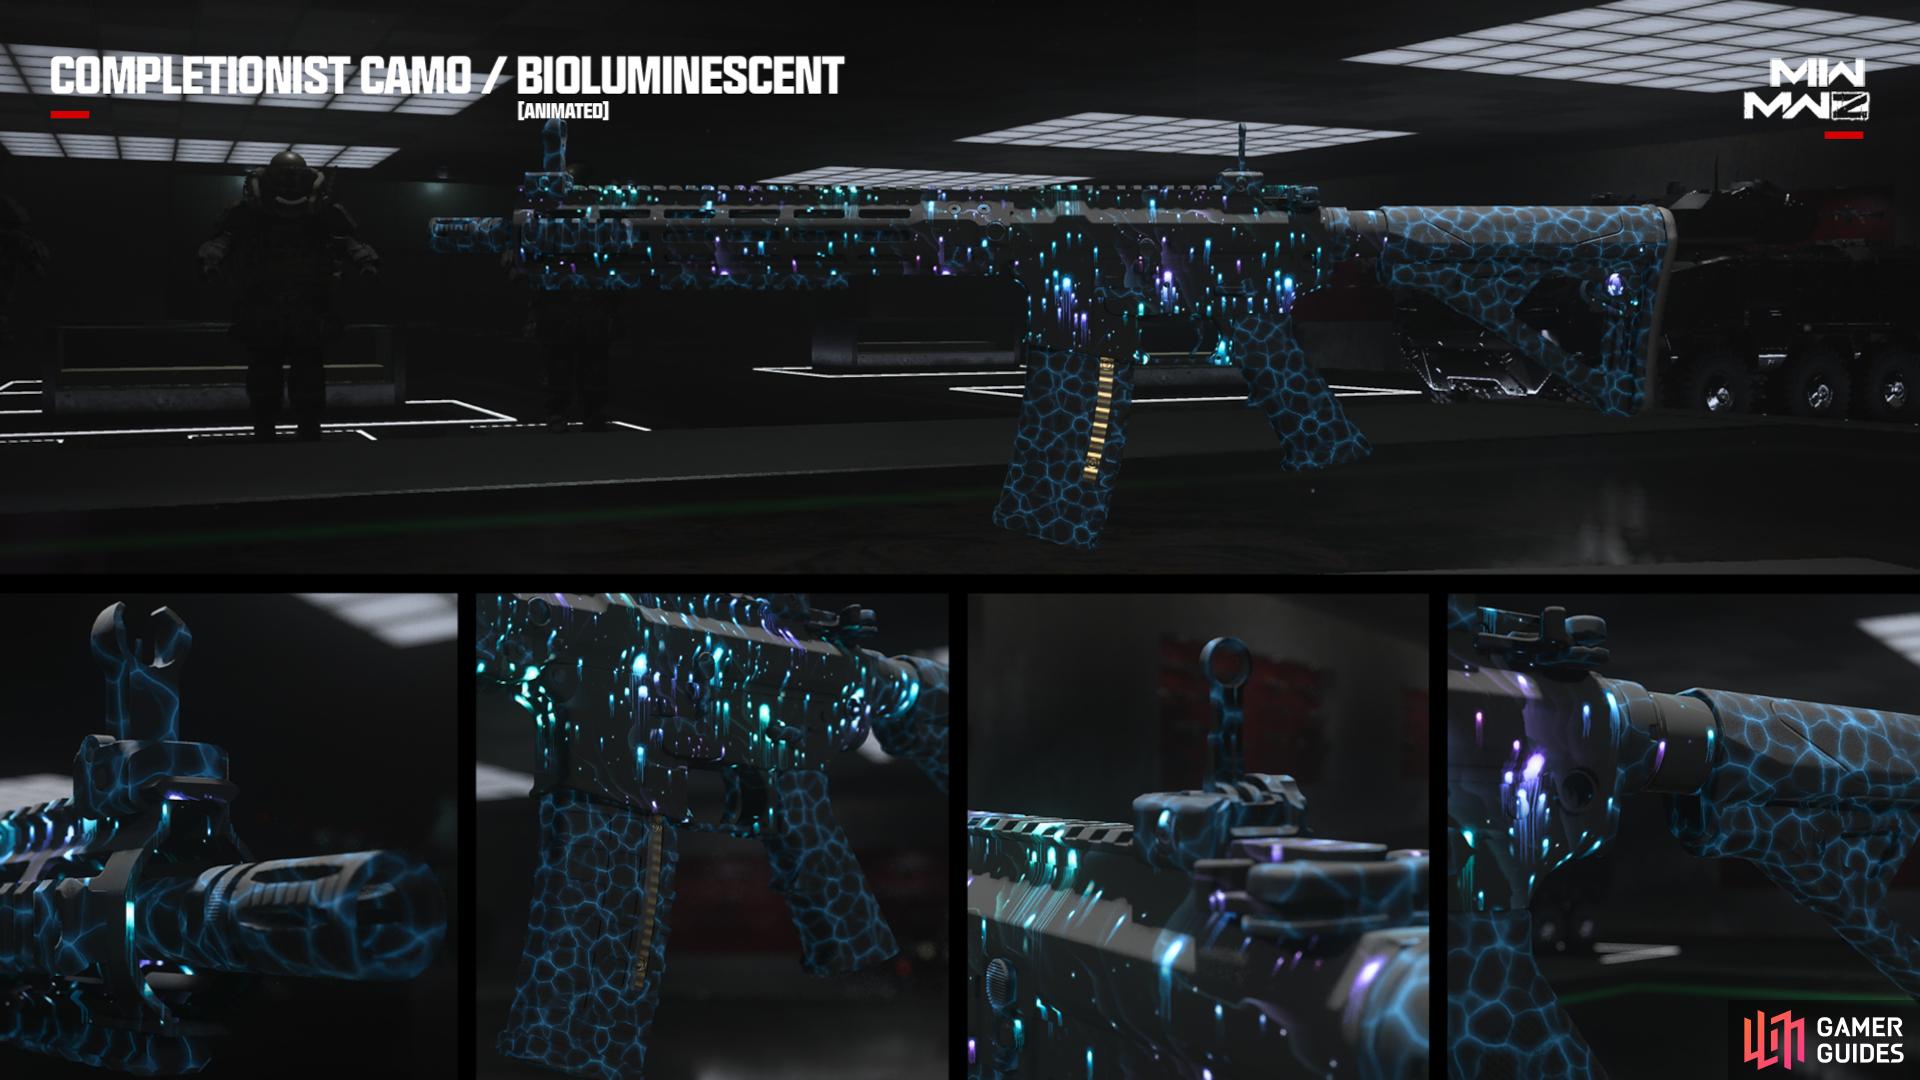 Bioluminescent is the final reward for grinding 51 guns to Arachnida tier for MW2 weapons in Zombies. Image via Activision.